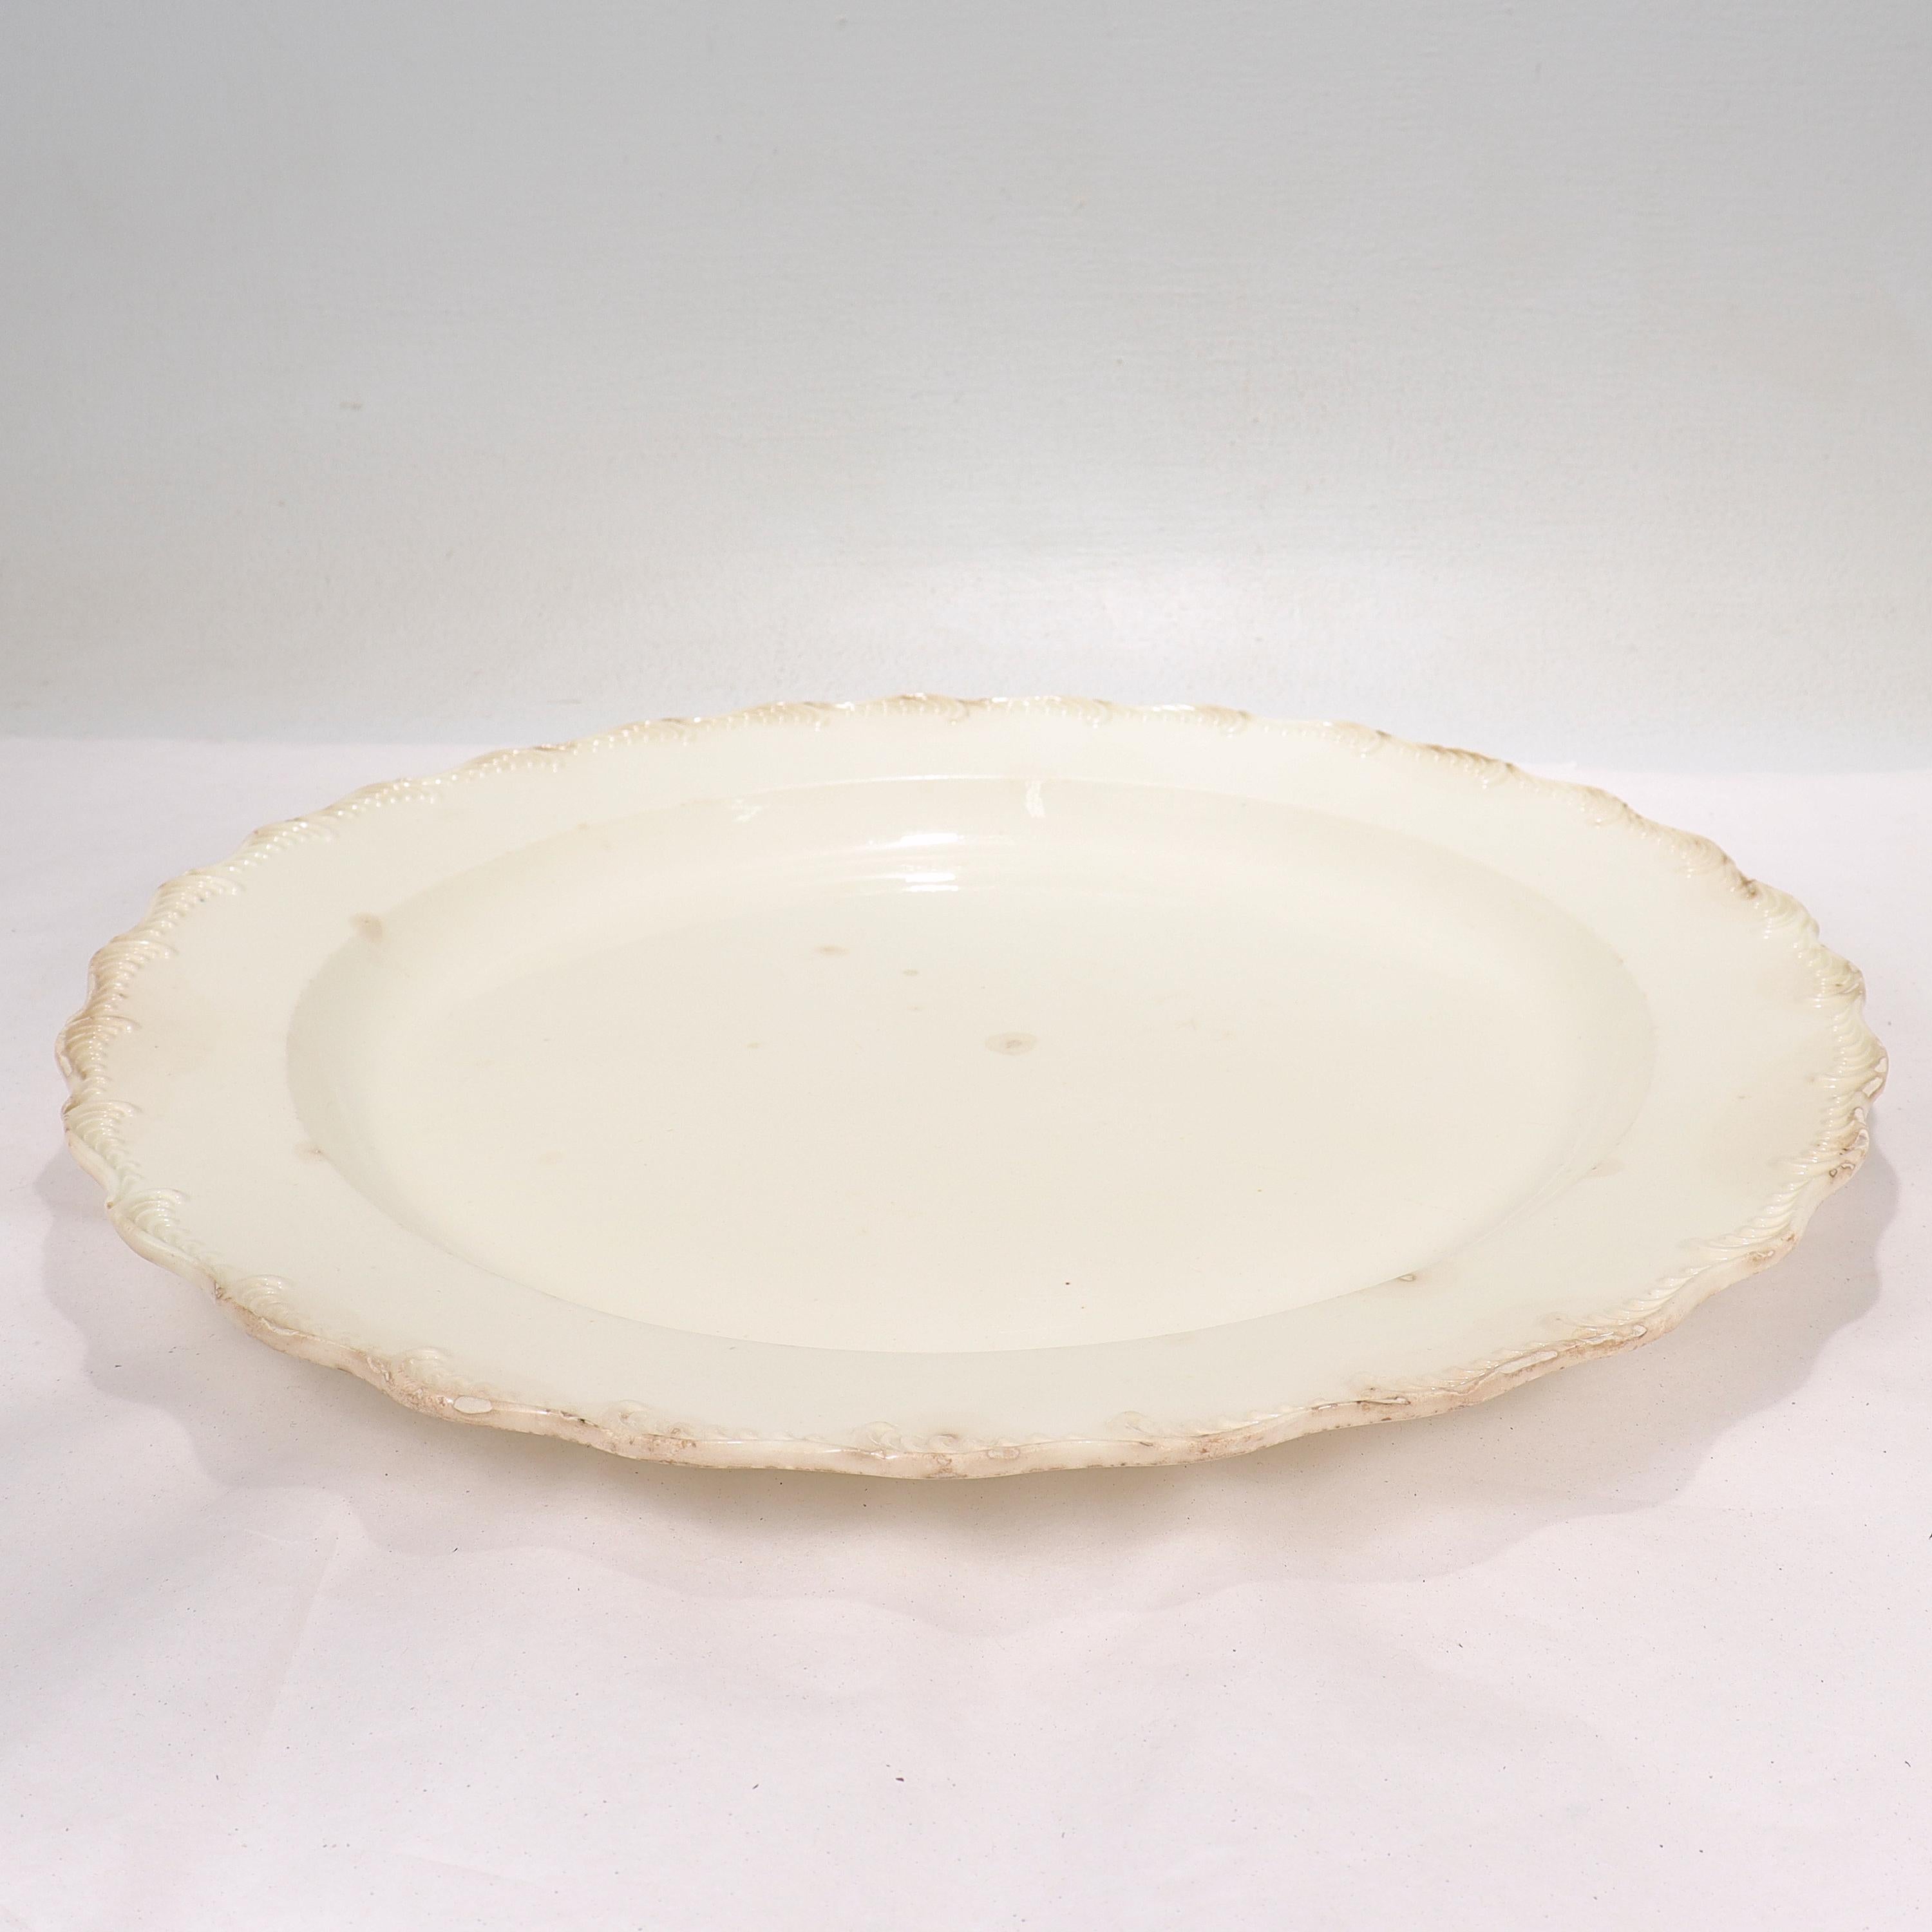 Large 18th Century Leeds/Staffordshire English Creamware Charger or Wall Plate In Fair Condition For Sale In Philadelphia, PA